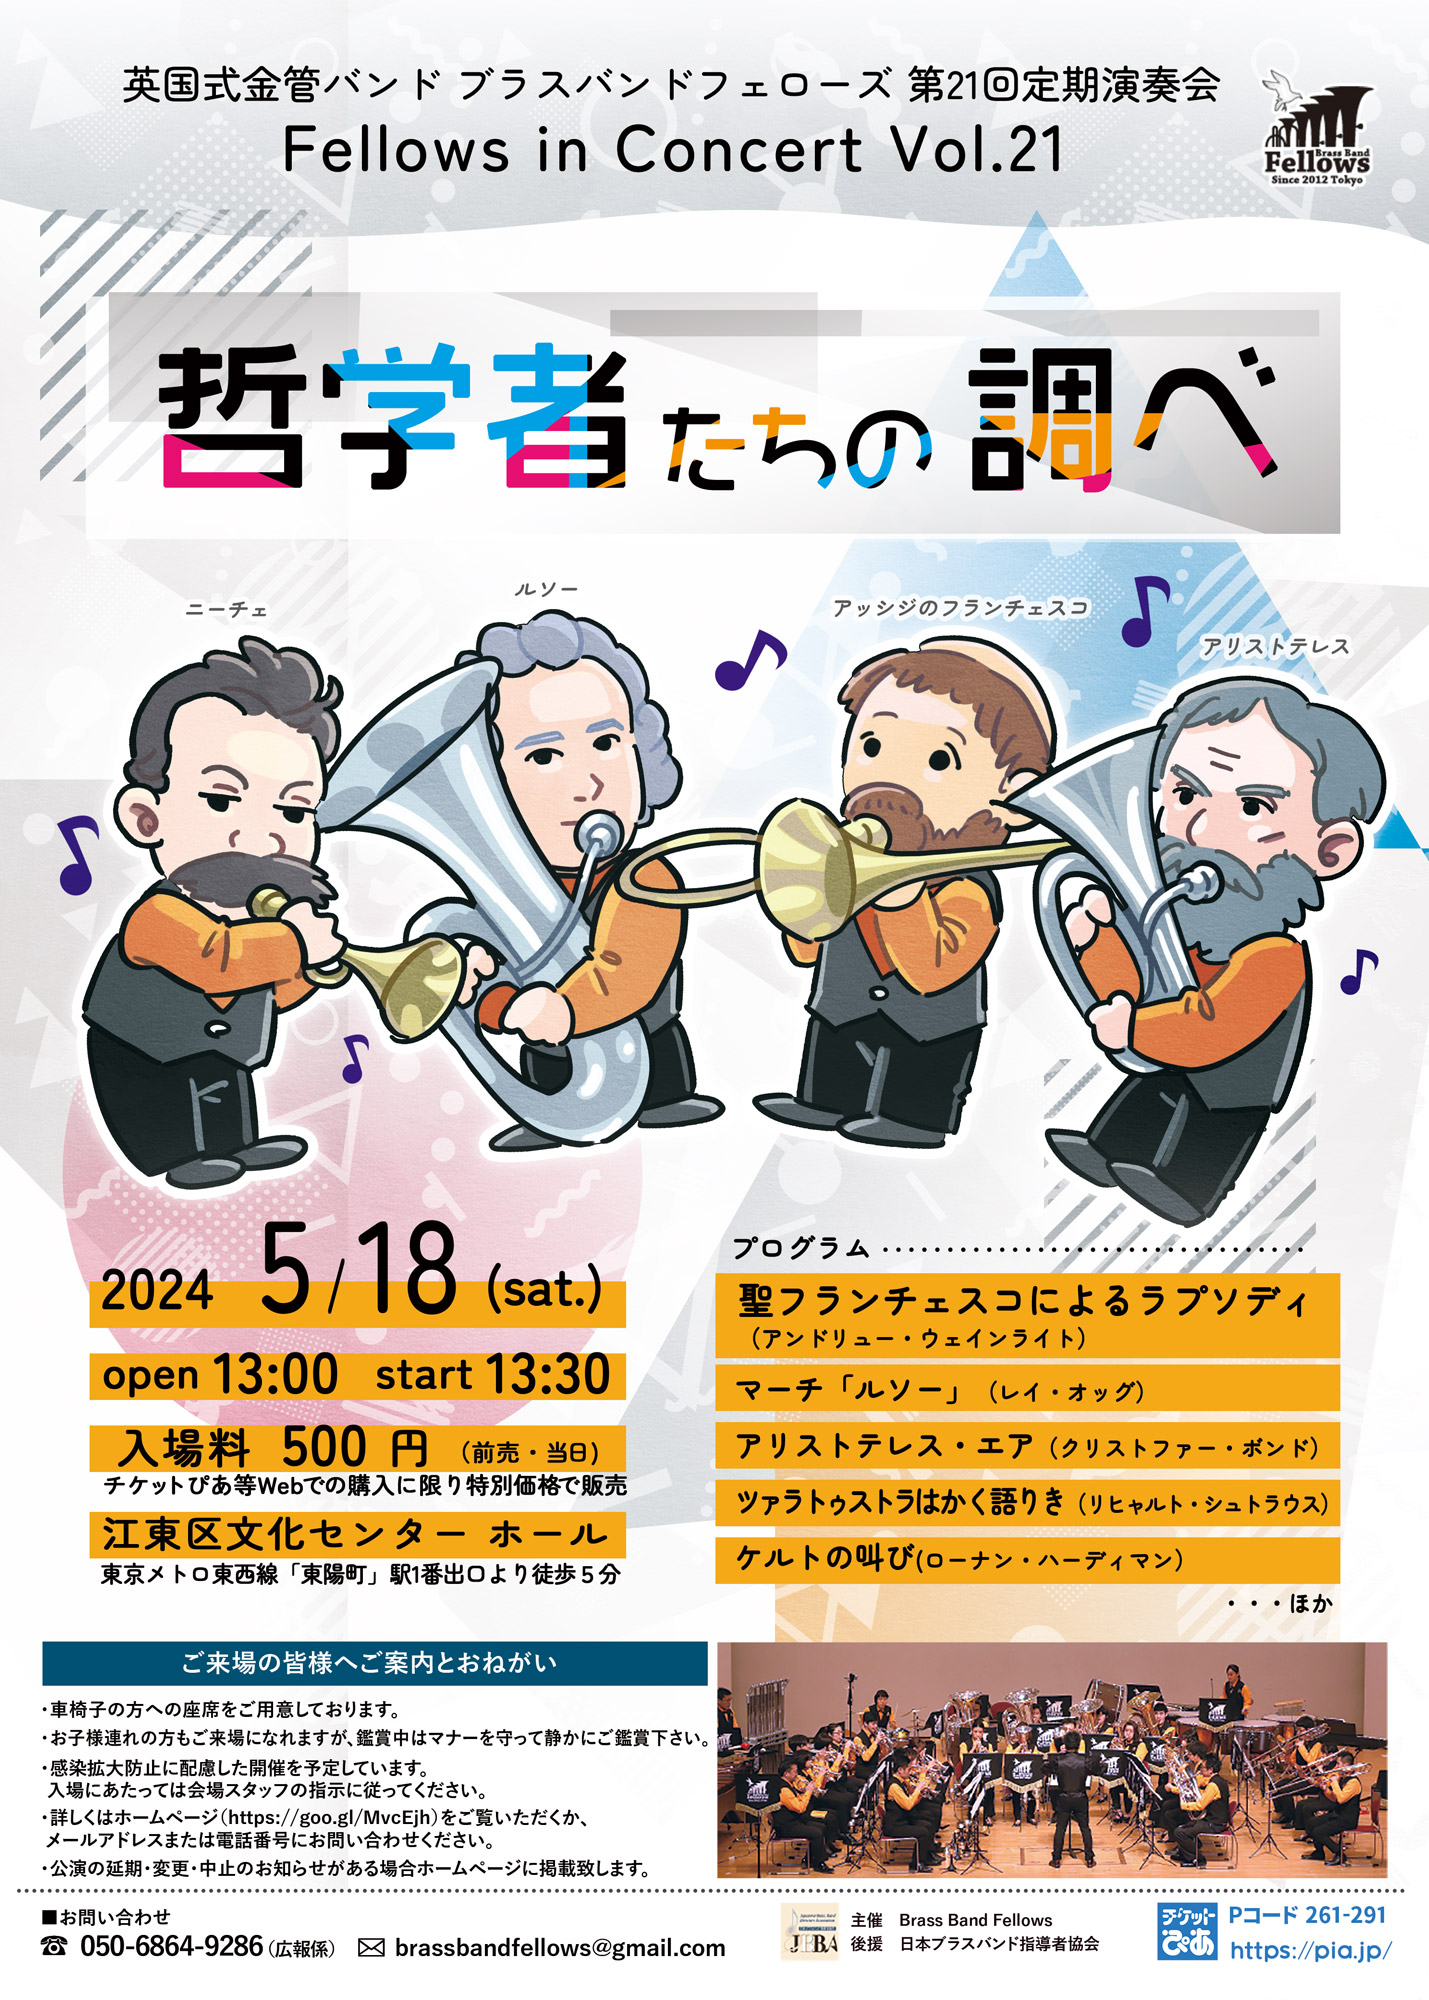 Brass Band Fellows / Fellows in Concert Vol.21 『哲学者たちの調べ』